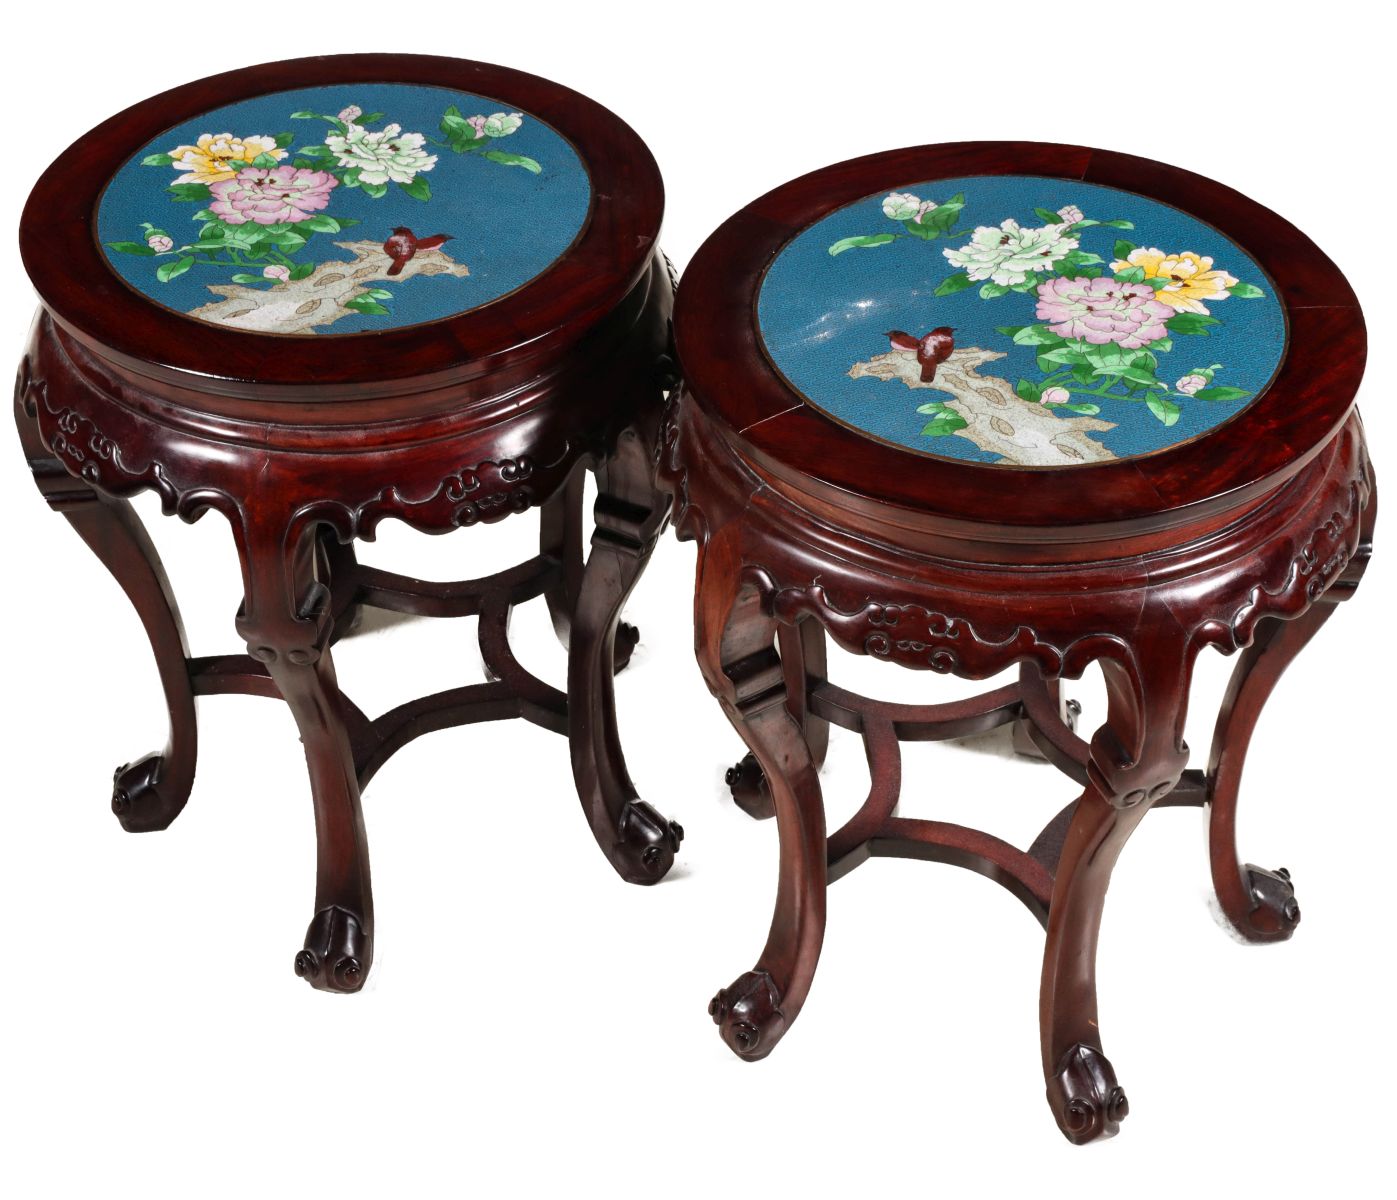 A PAIR LATE 20TH C. SIDE TABLES WITH CLOISONNE INLAY